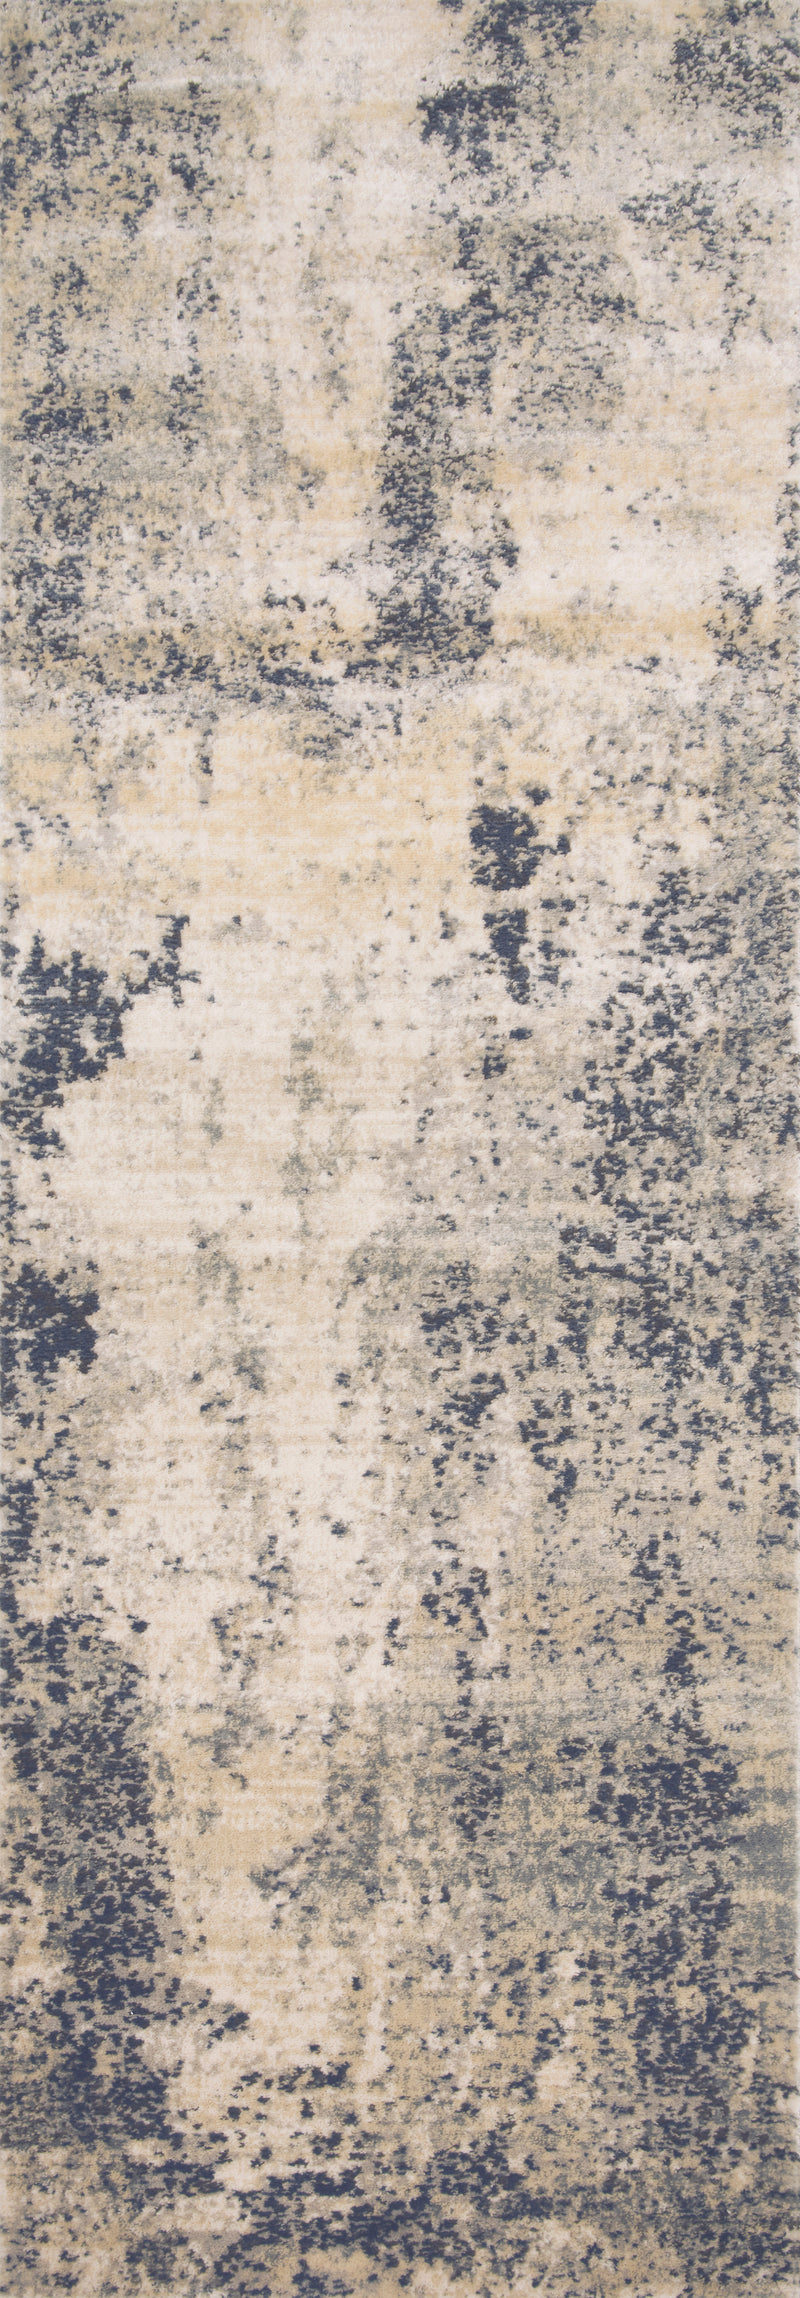 media image for Teagan Rug in Natural / Denim by Loloi II 296